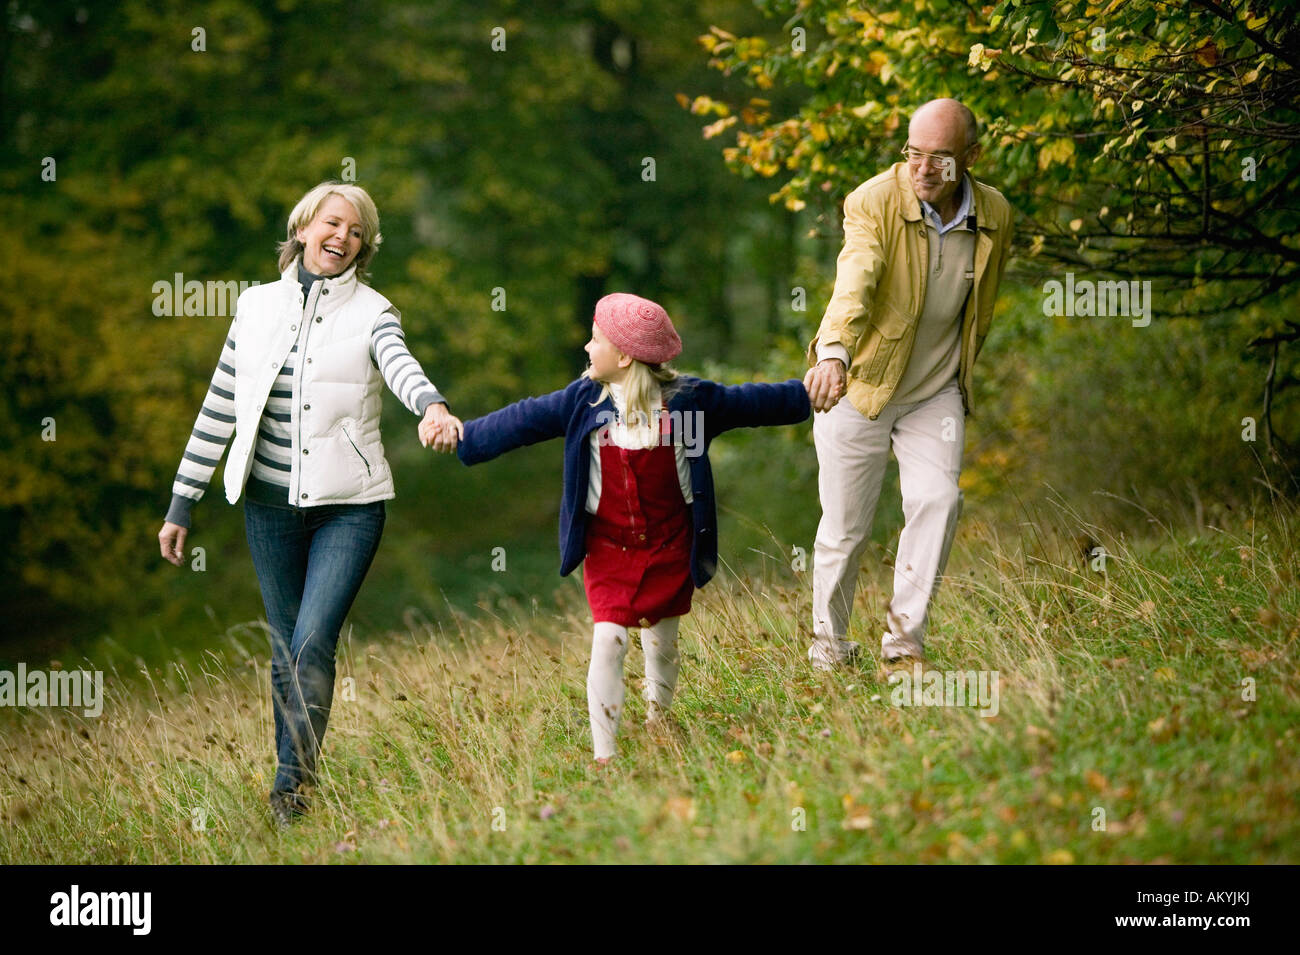 Germany, Baden-Württemberg, Swabby woodian mountains, Grandparents and granddoughter (6-7) walking in forest Stock Photo